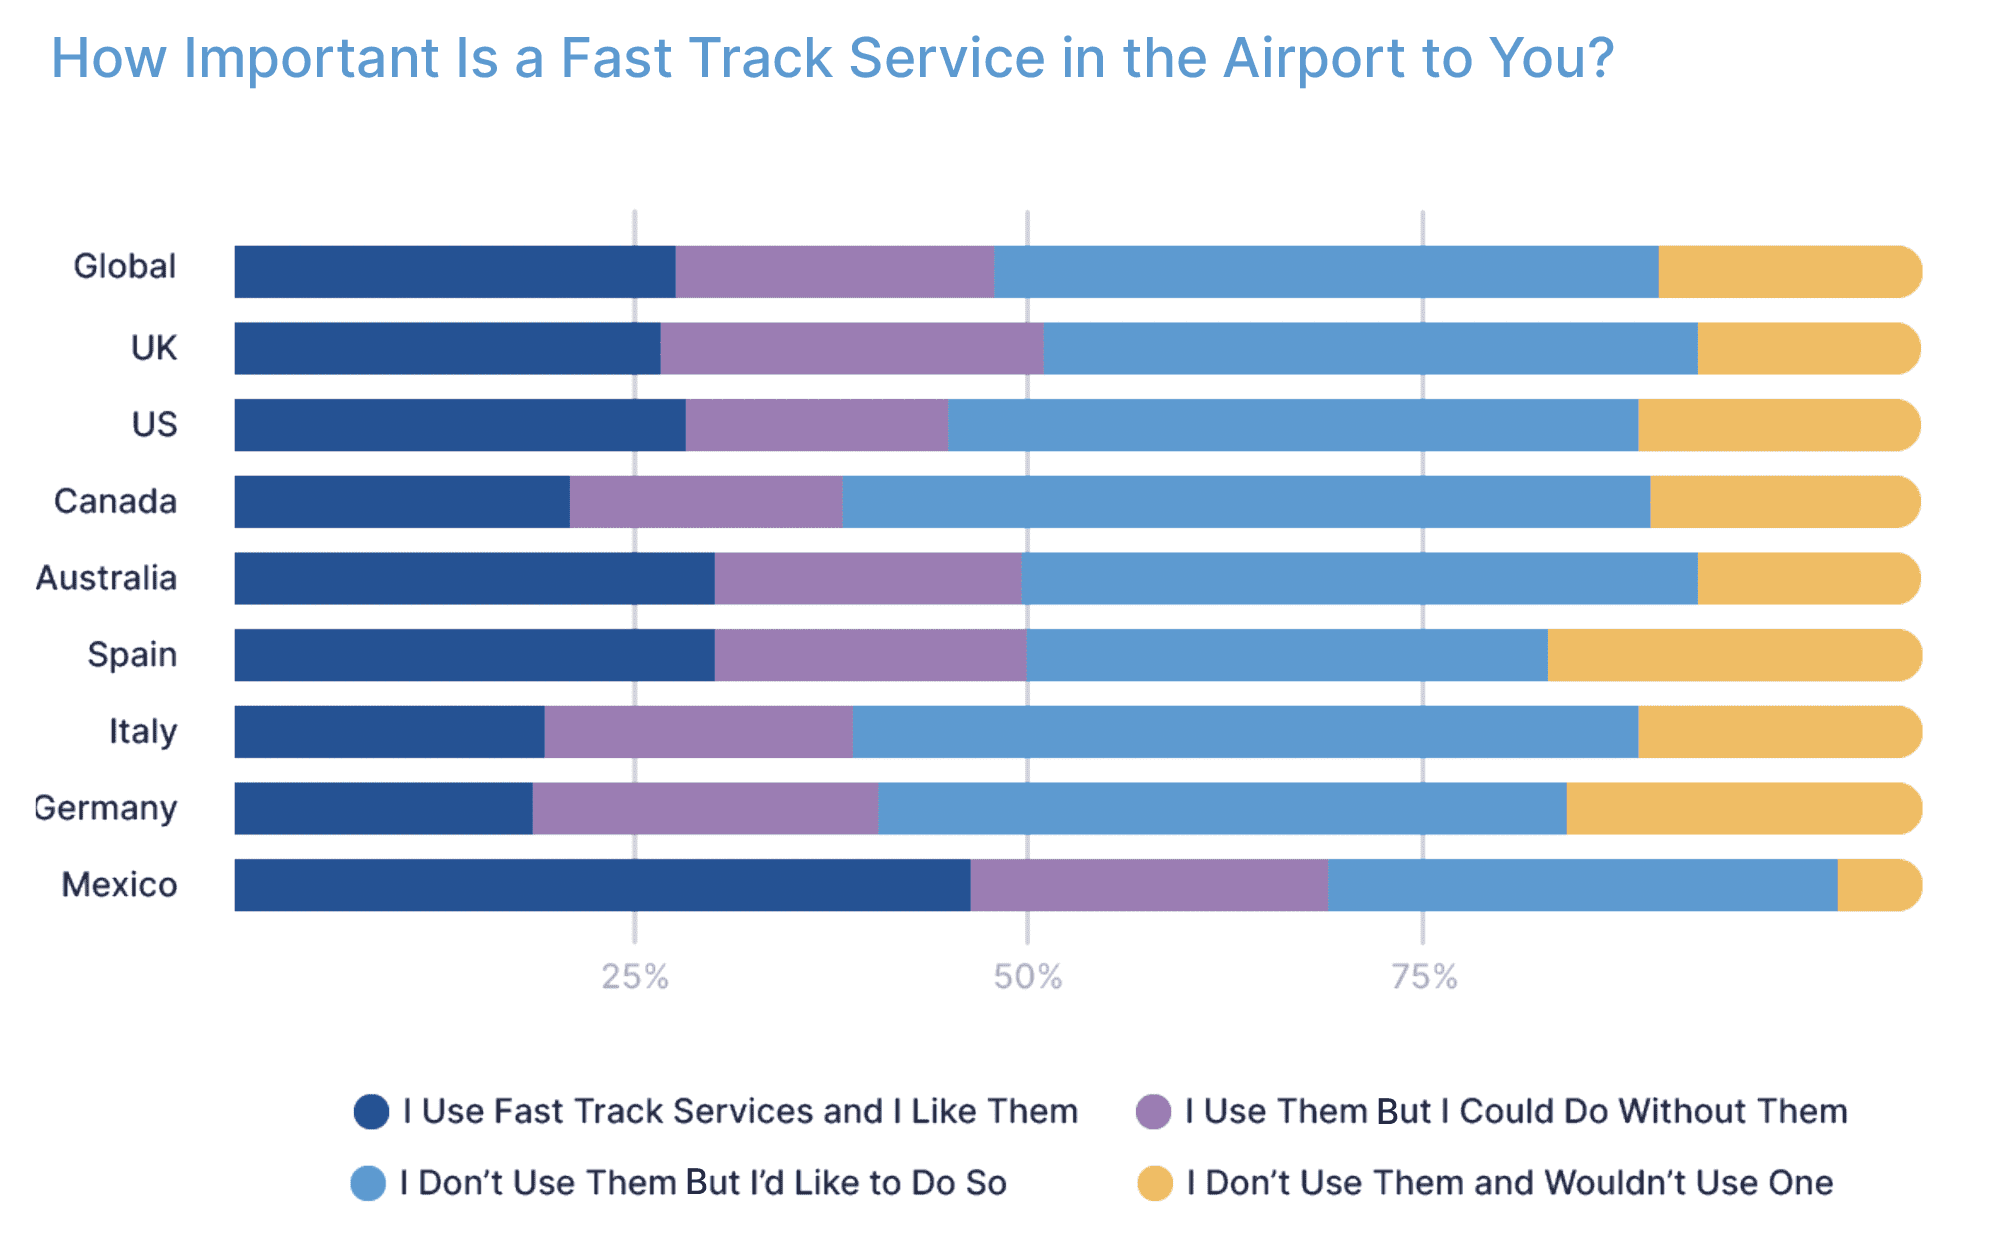 How important is a fast track service in the airport to travelers